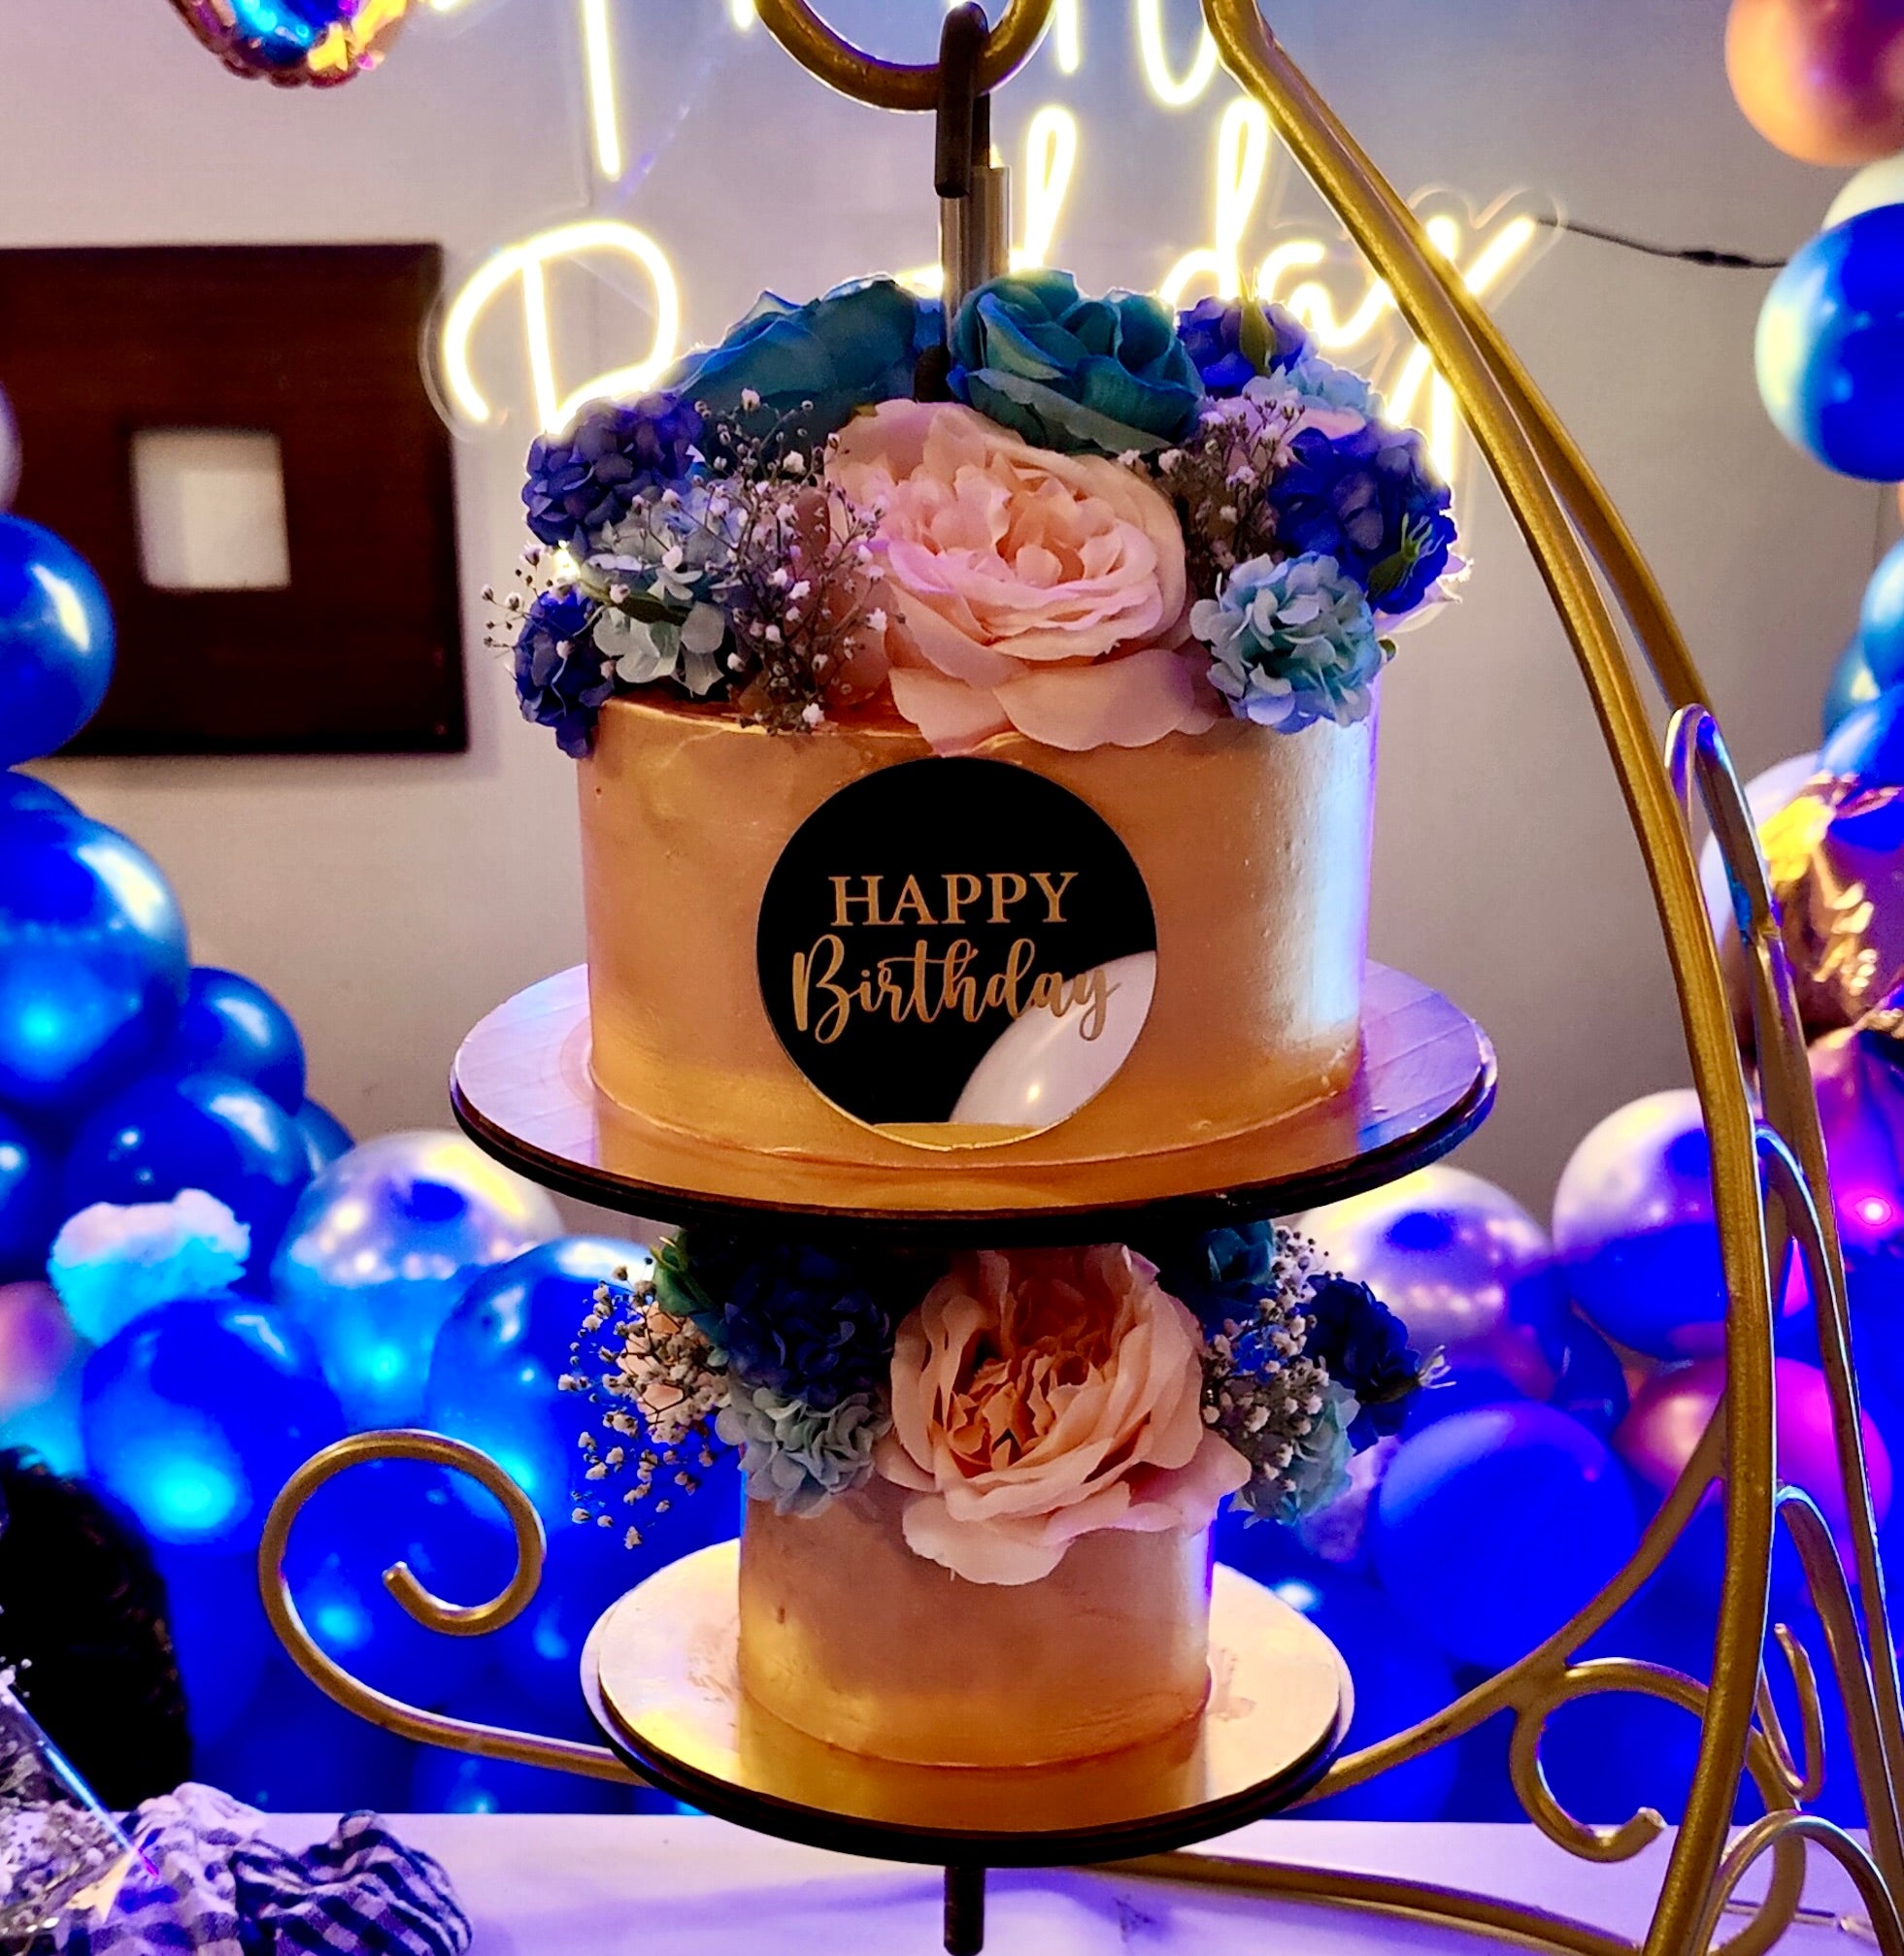 Tips To Choose The Perfect Cake For Every Special Event - Cakebuzz